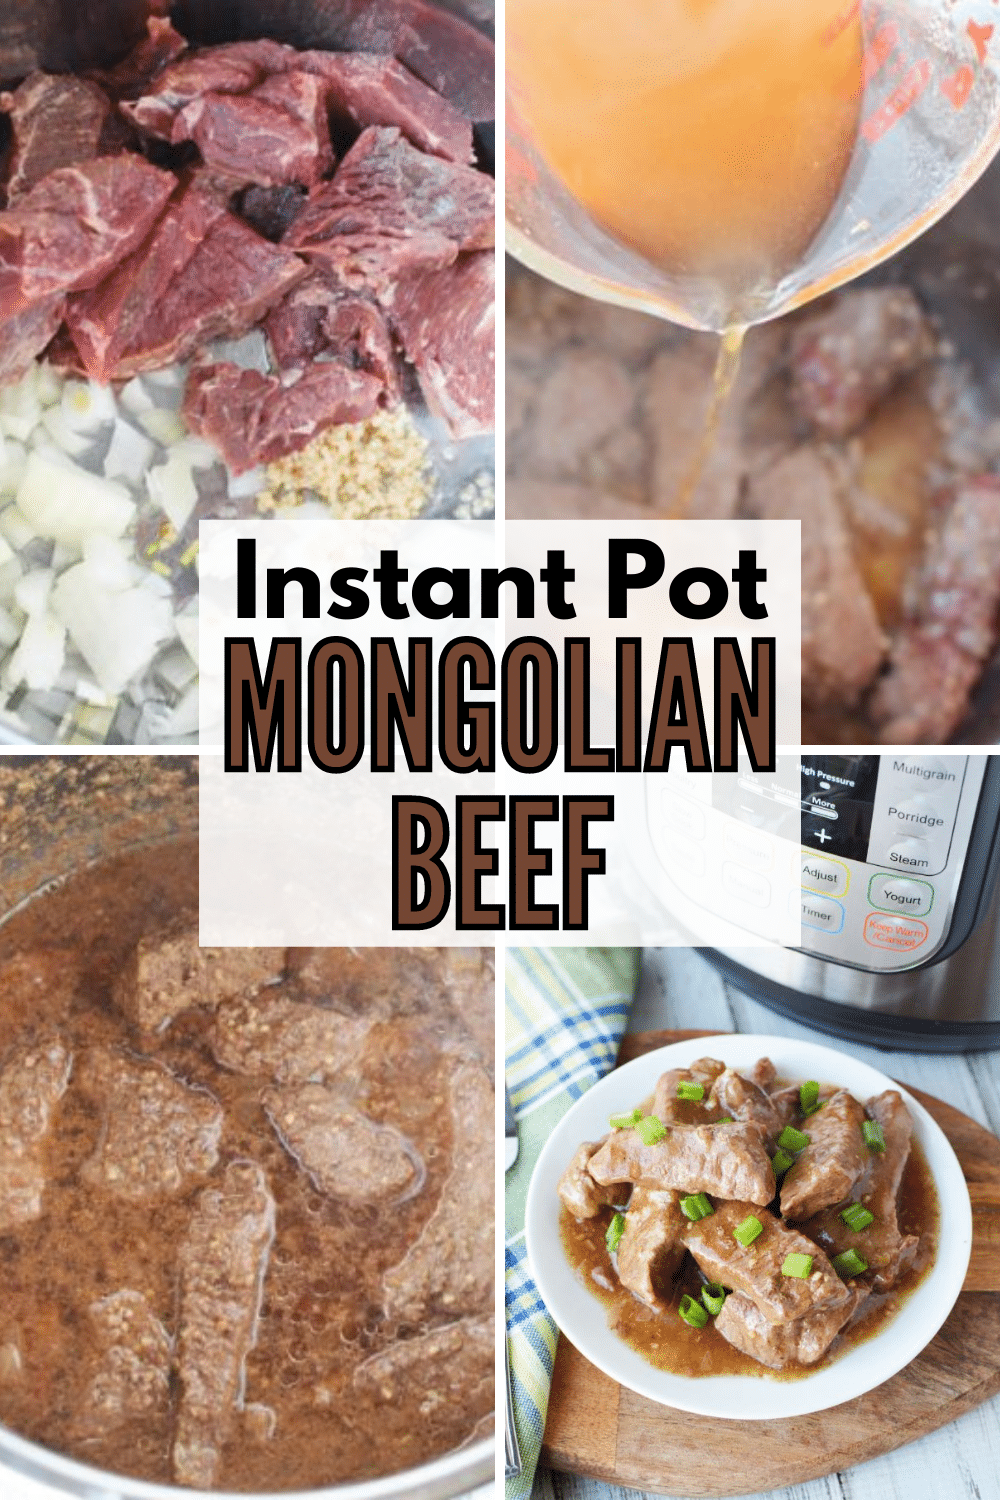 This Instant Pot Mongolian Beef is even better than takeout and so easy to make in your pressure cooker! #instantpot #pressurecooker #mongolianbeef #dinnerrecipe via @wondermomwannab